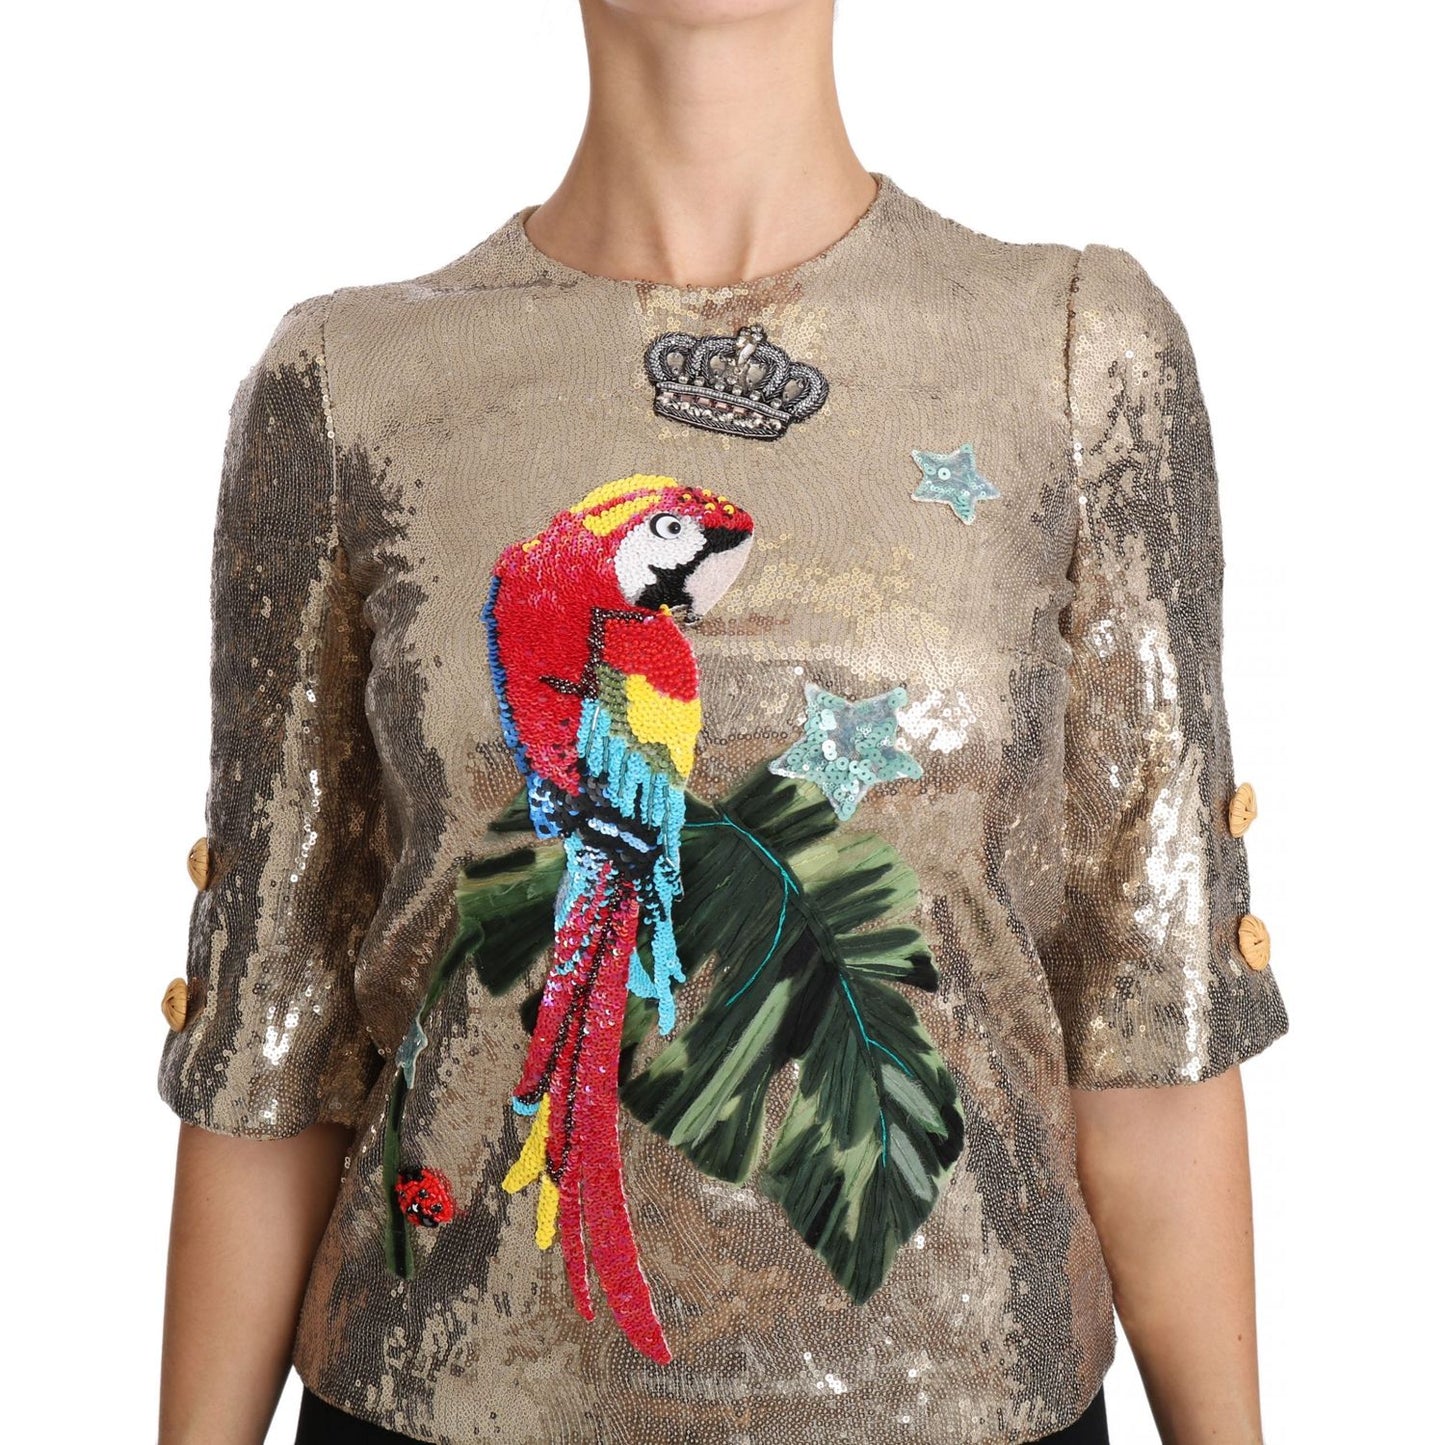 Dolce & Gabbana Gold Parrot Motif Crewneck Blouse with Crystals gold-sequined-parrot-crystal-blouse 654059-gold-sequined-parrot-crystal-blouse-2.jpg